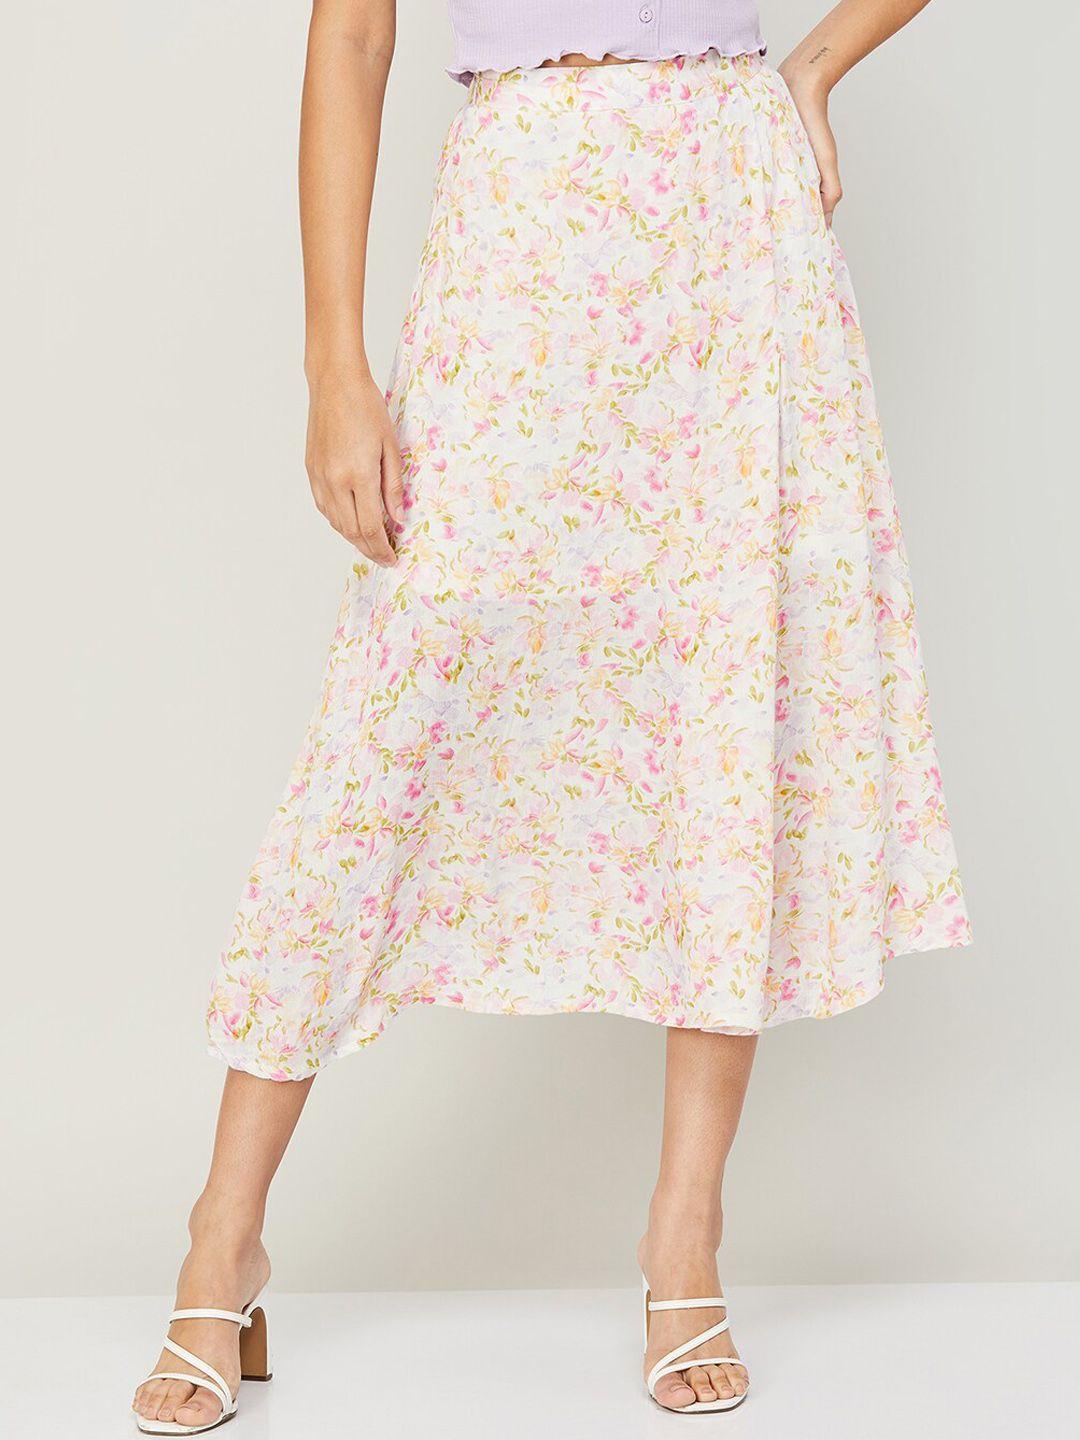 ginger by lifestyle floral printed knee length skirt